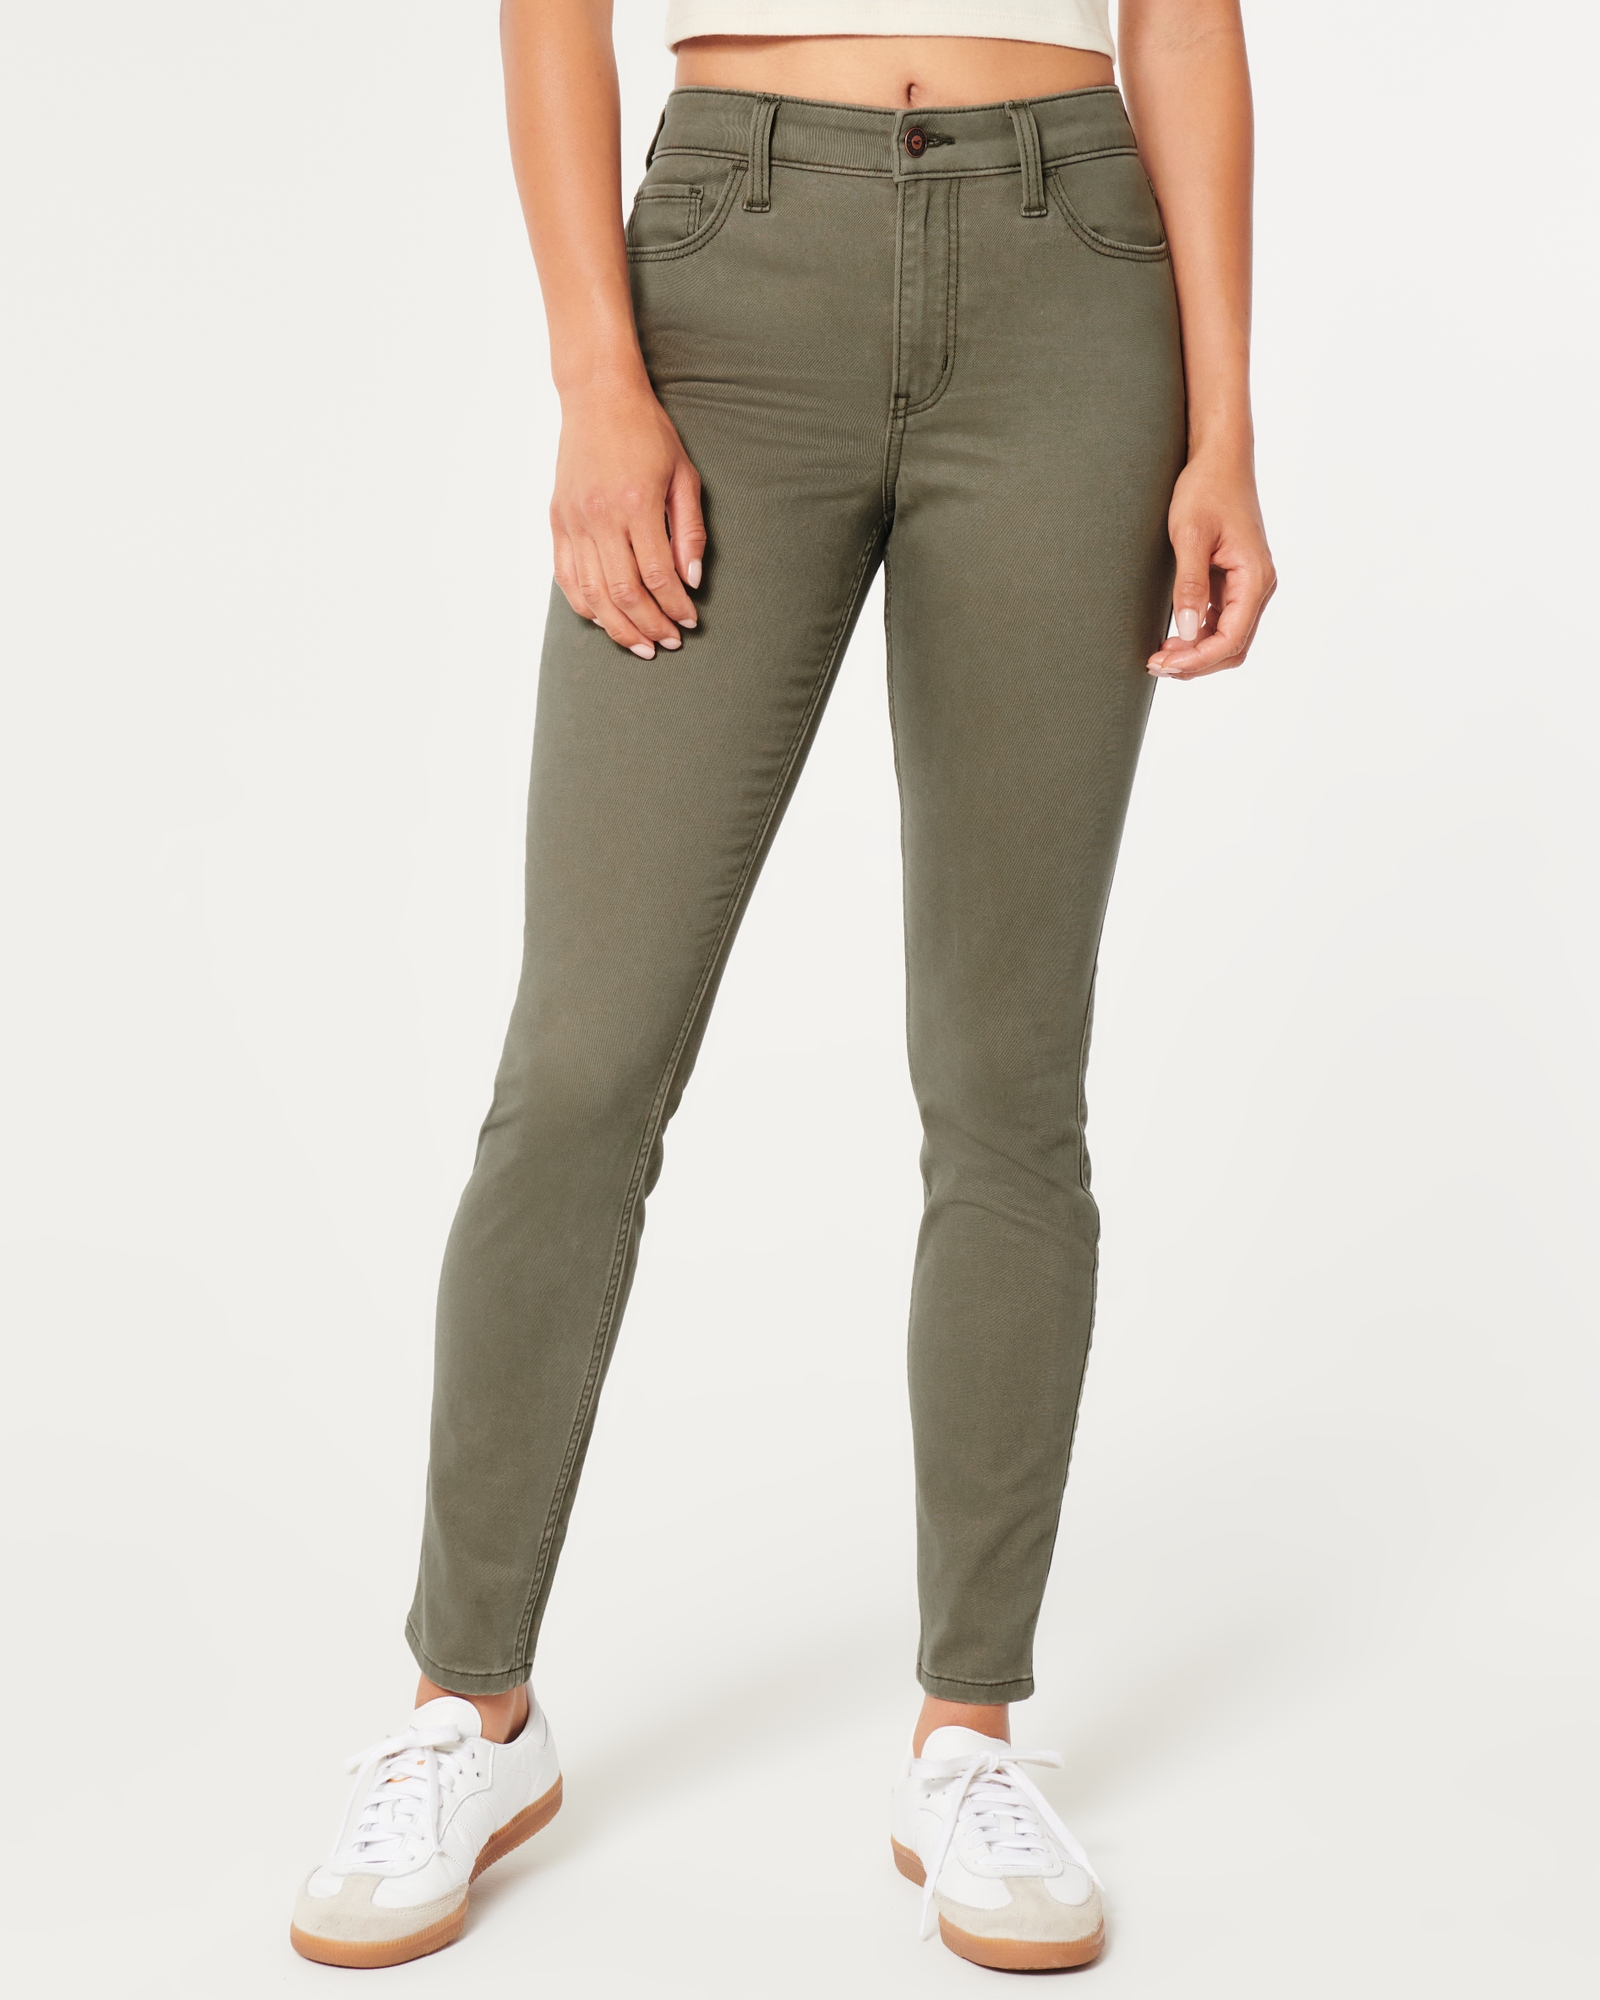 Skinny Olive Green Ladies Denim Jeans, Button, Ultra Low Rise at Rs  280/piece in Mumbai